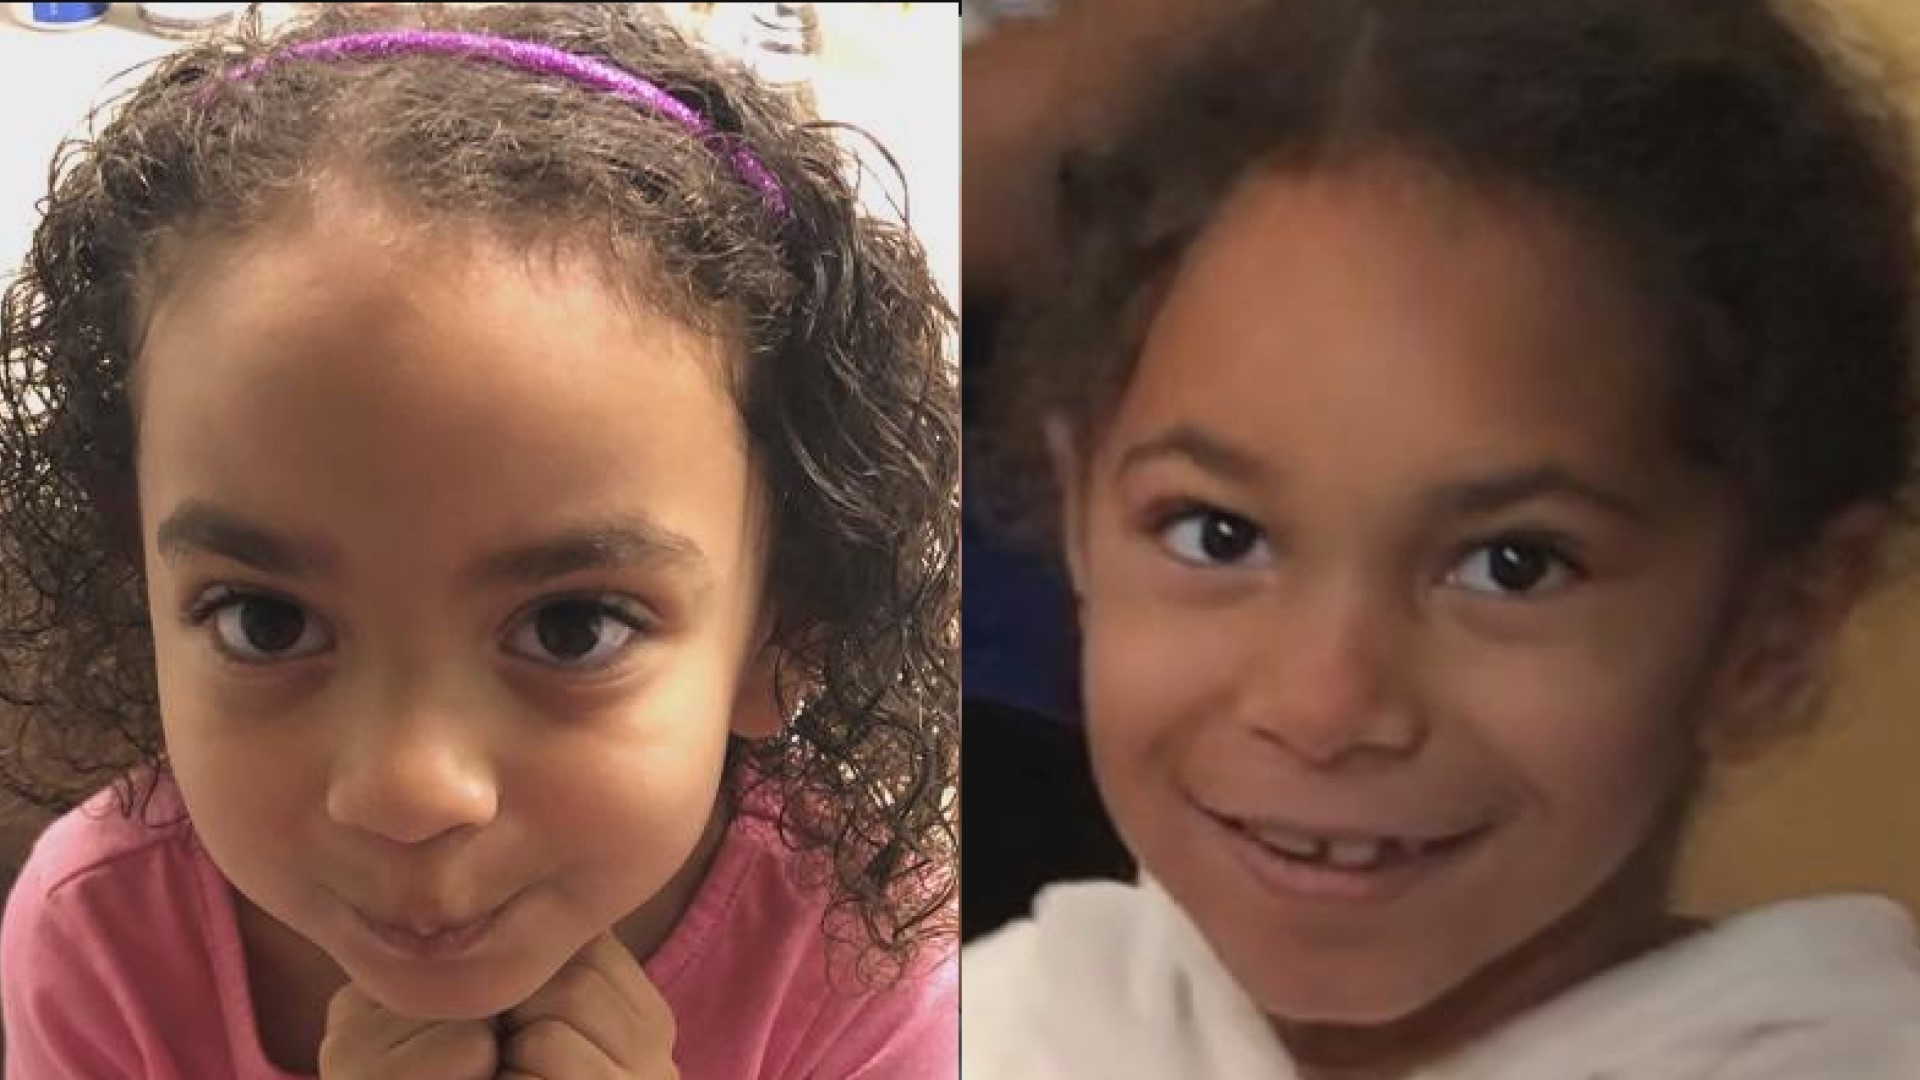 Heartbroken father cries for kids 2 years after disappearance | wusa9.com